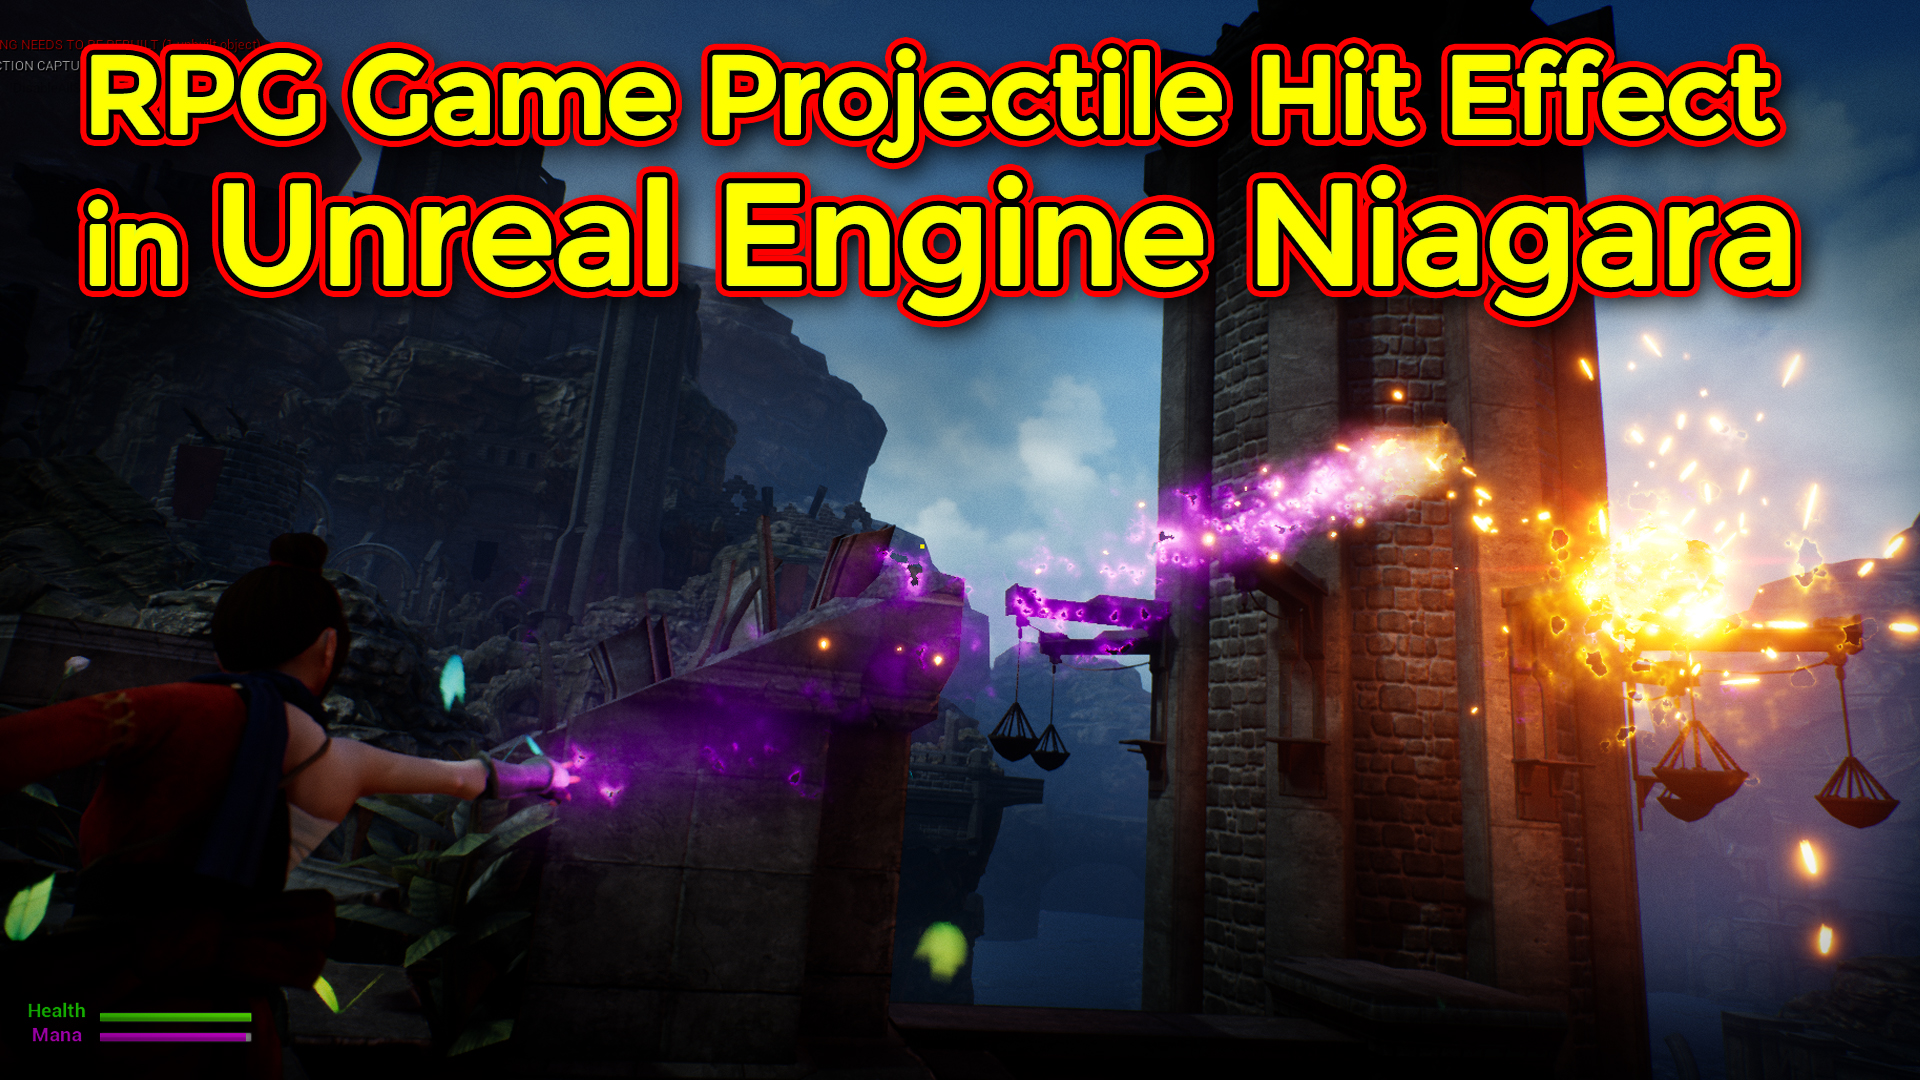 RPG Game Projectile Hit Impact Effect Part 3 | Unreal Engine Niagara Tutorial